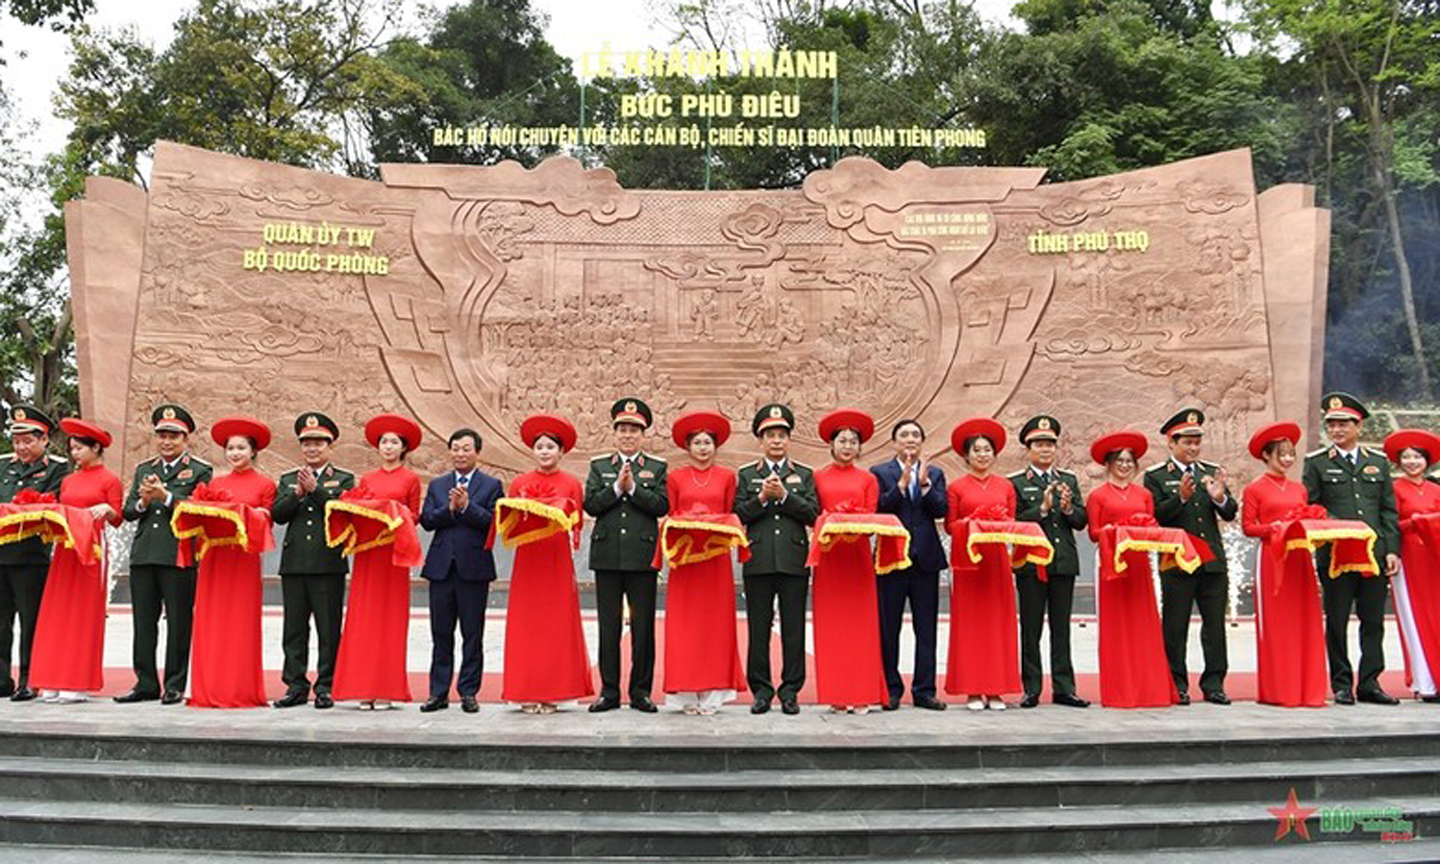 Bas-relief sculpture featuring President Ho and soldiers of 308 Infantry Division inaugurated in Phu Tho 